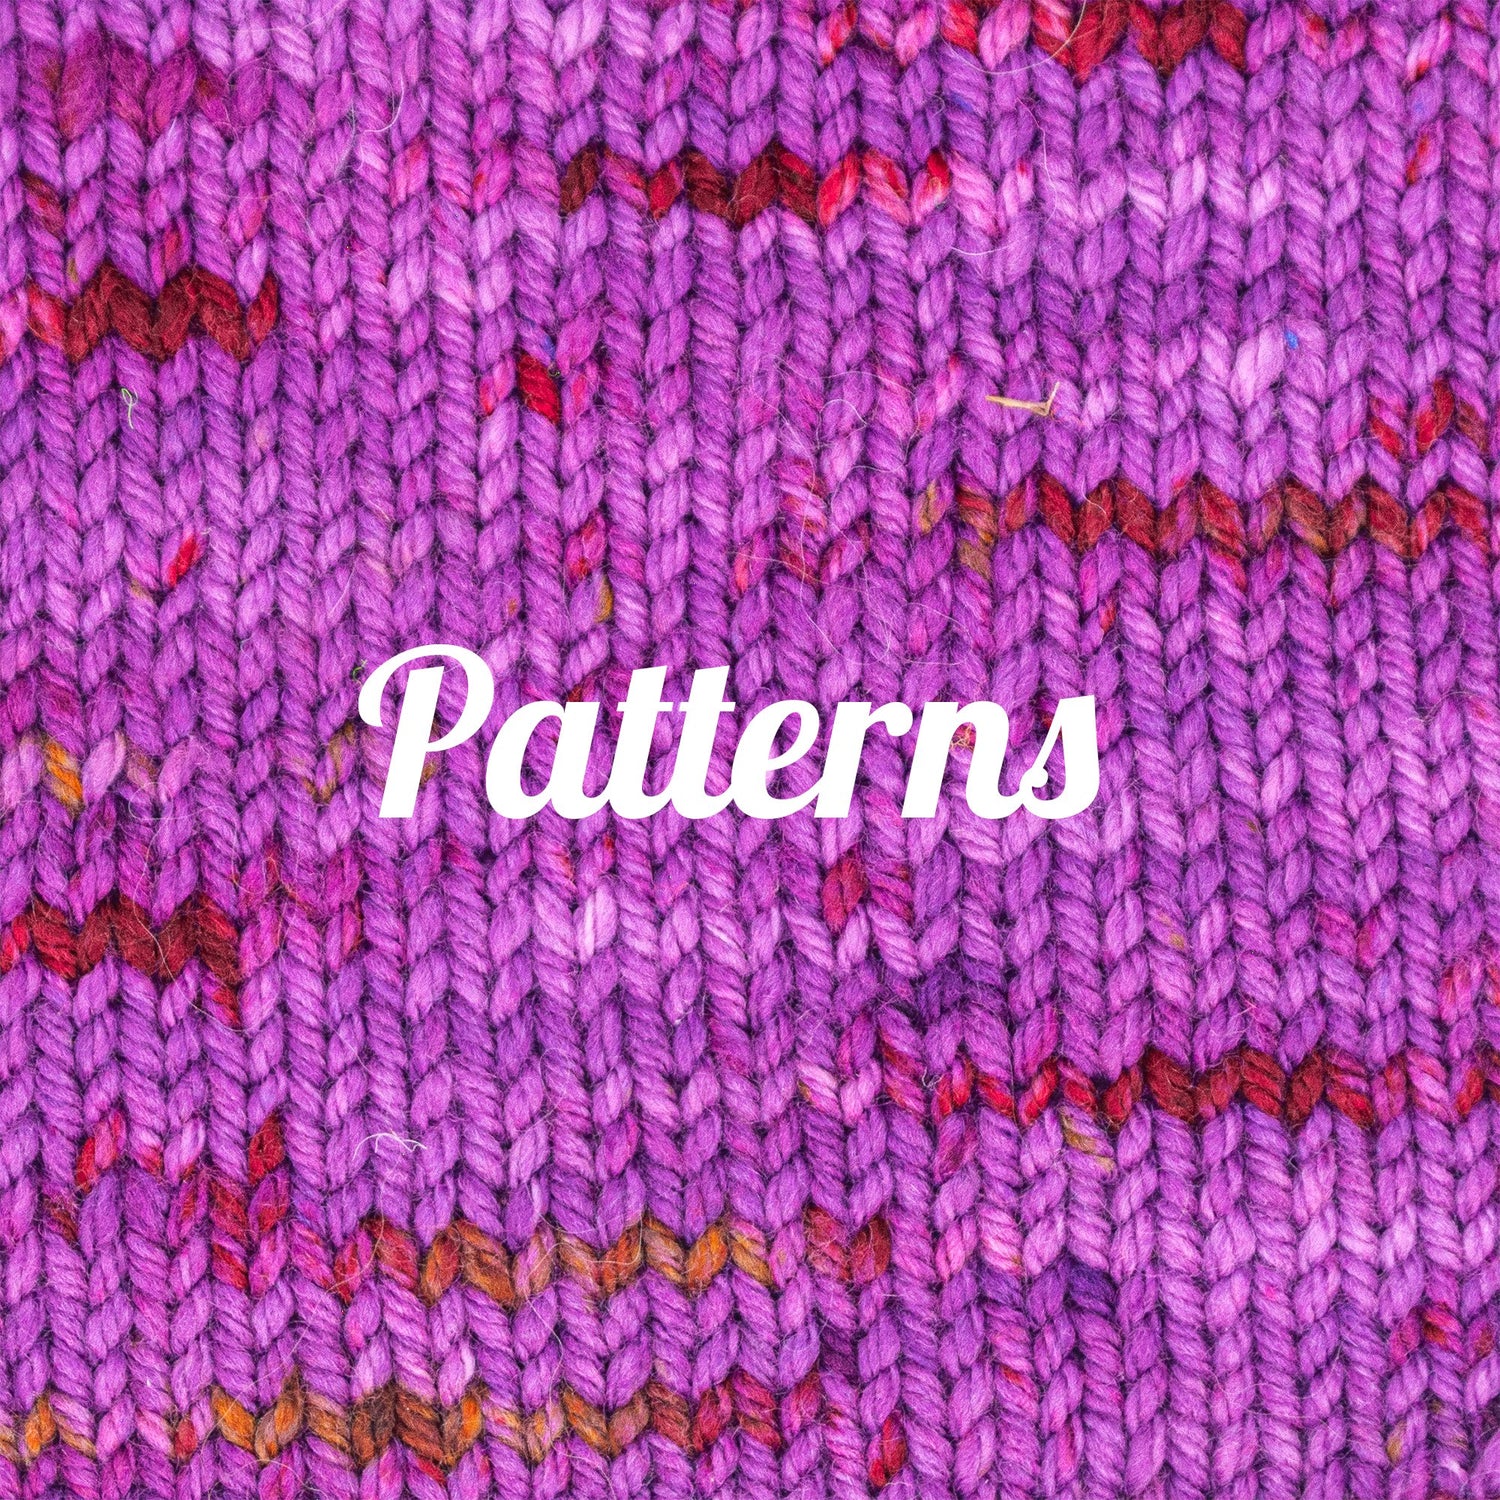 Browse All Patterns & Digital Goods